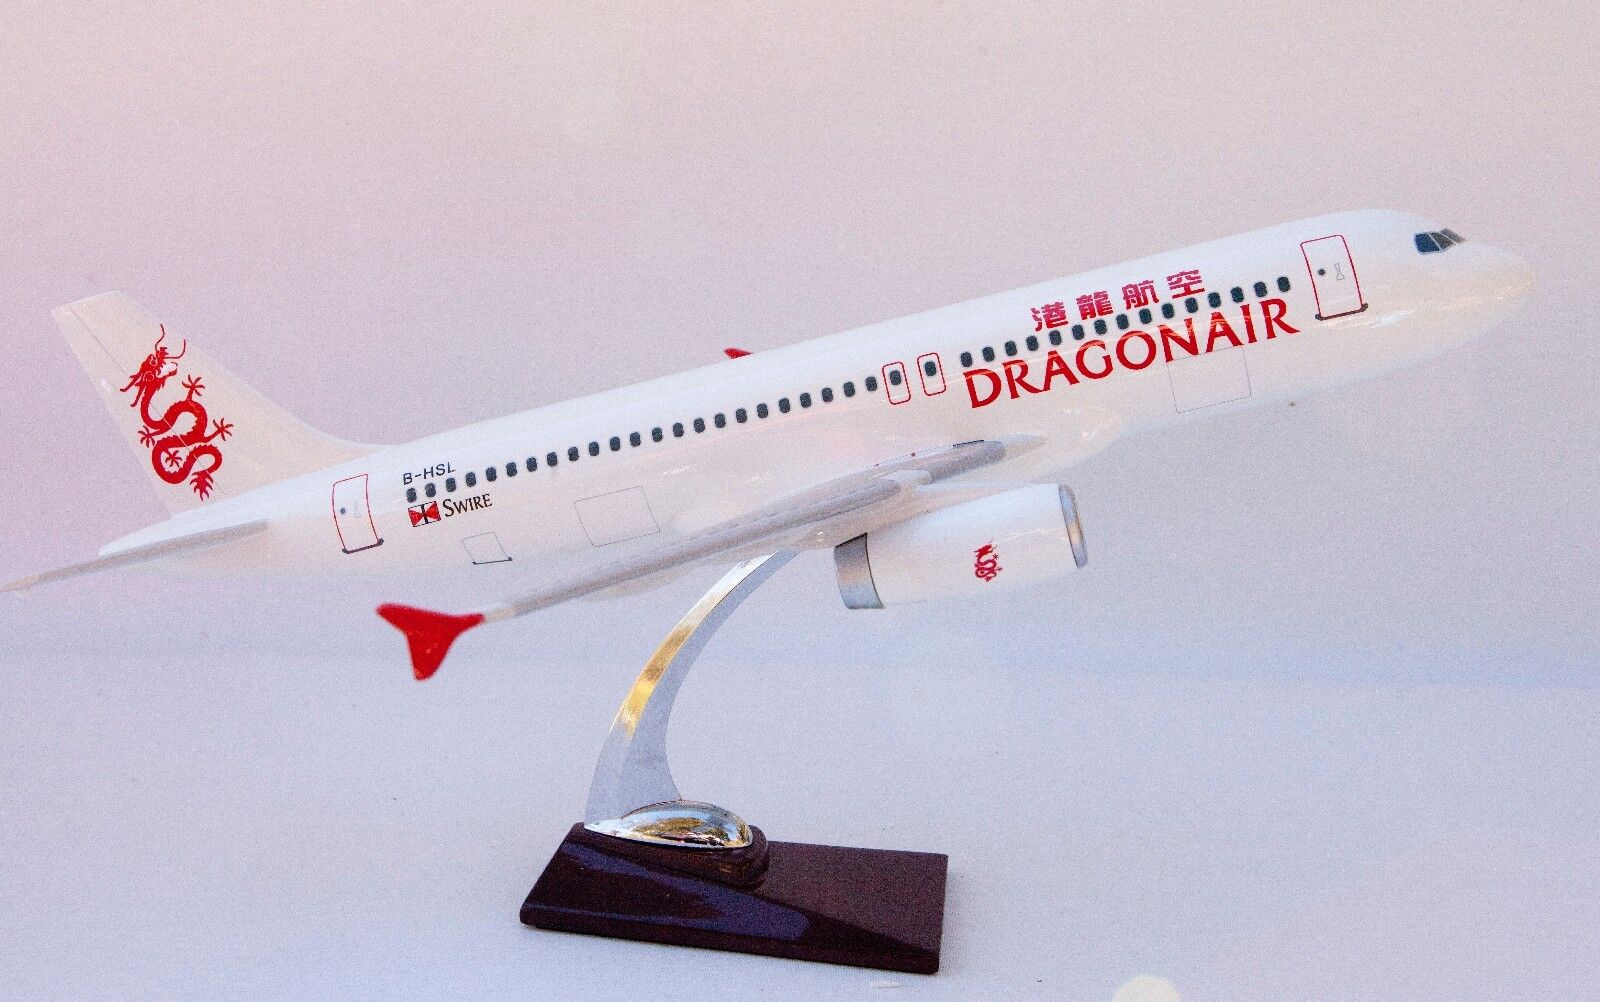 Dragon Air Large Display Plane Model  Airplane Apx 45Cm Solid Resin